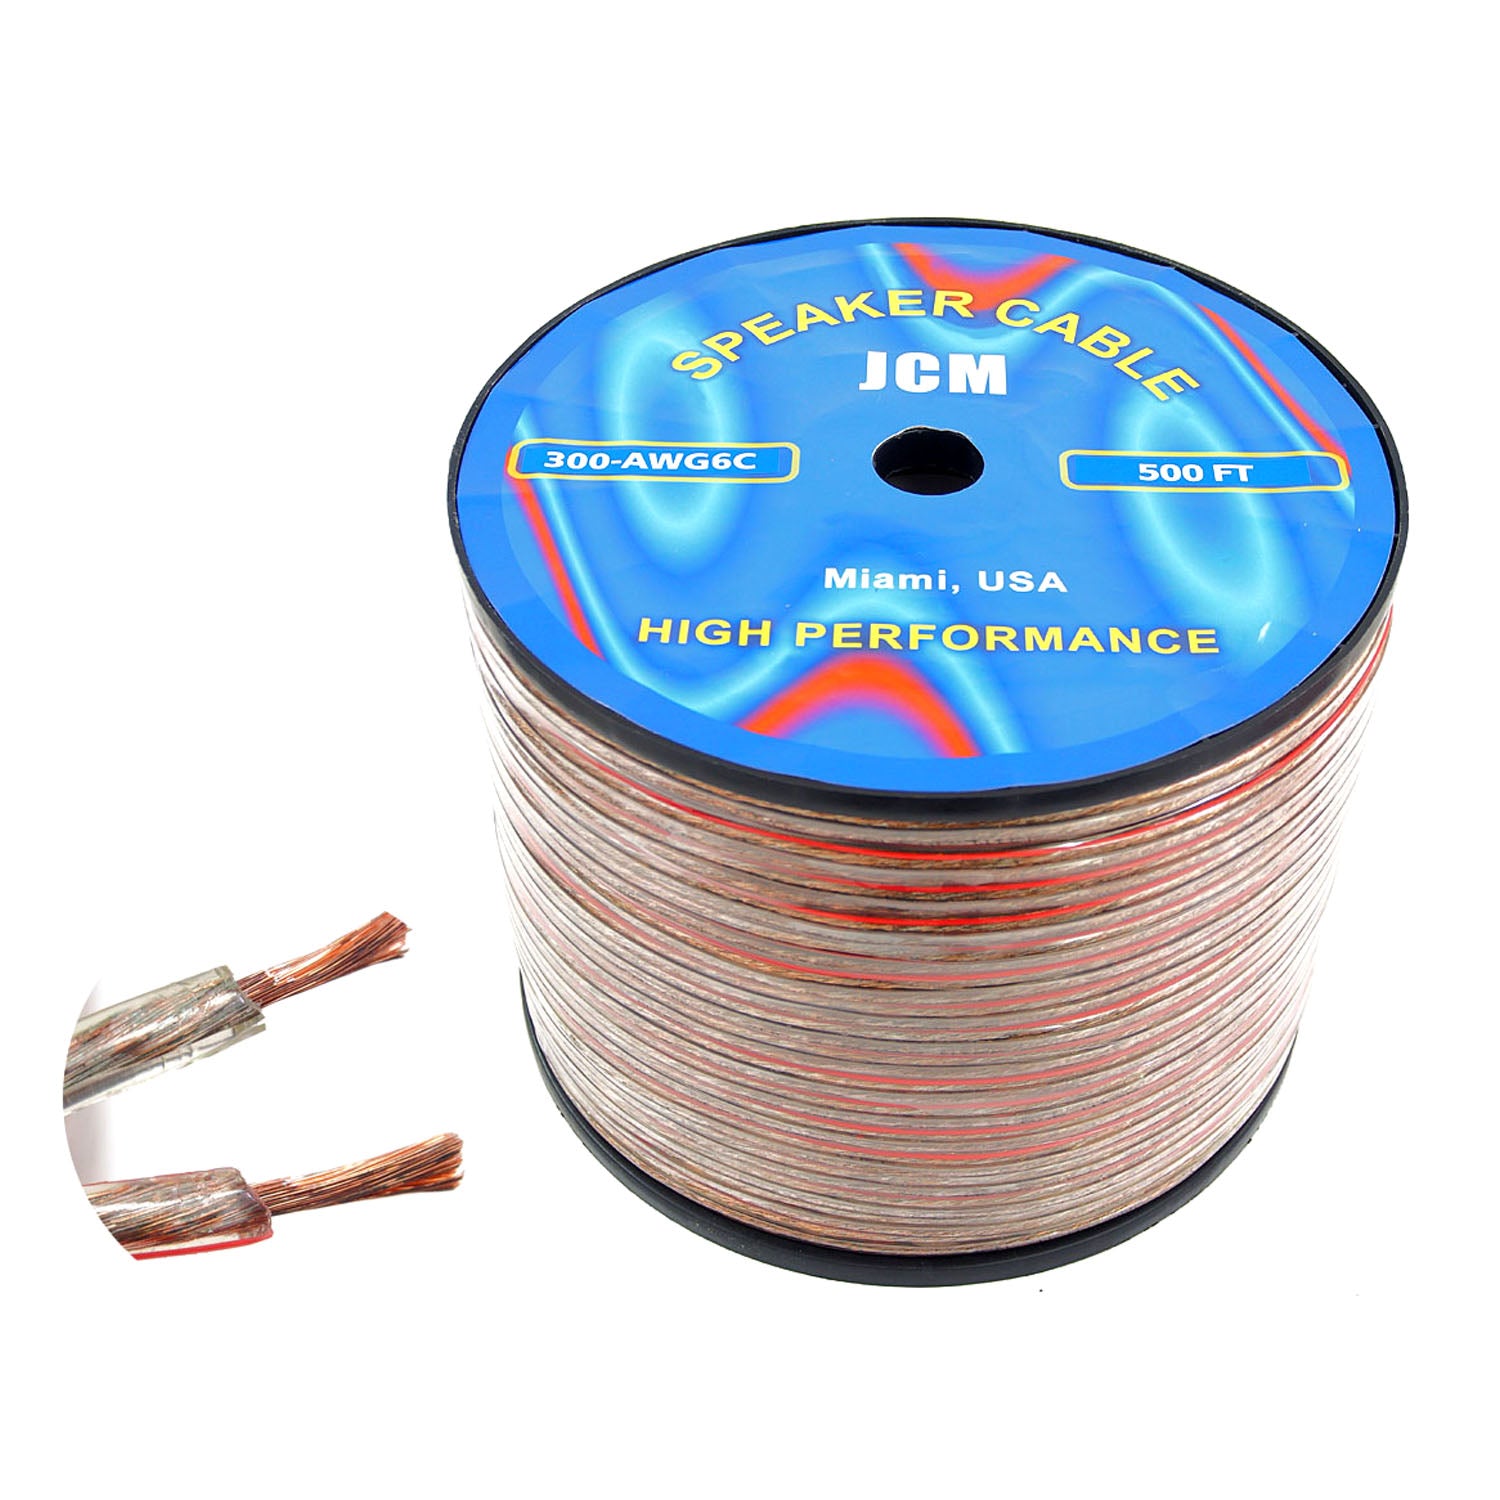 300-AWG6/C 500FT 6GA 2C Clear Spek Cable